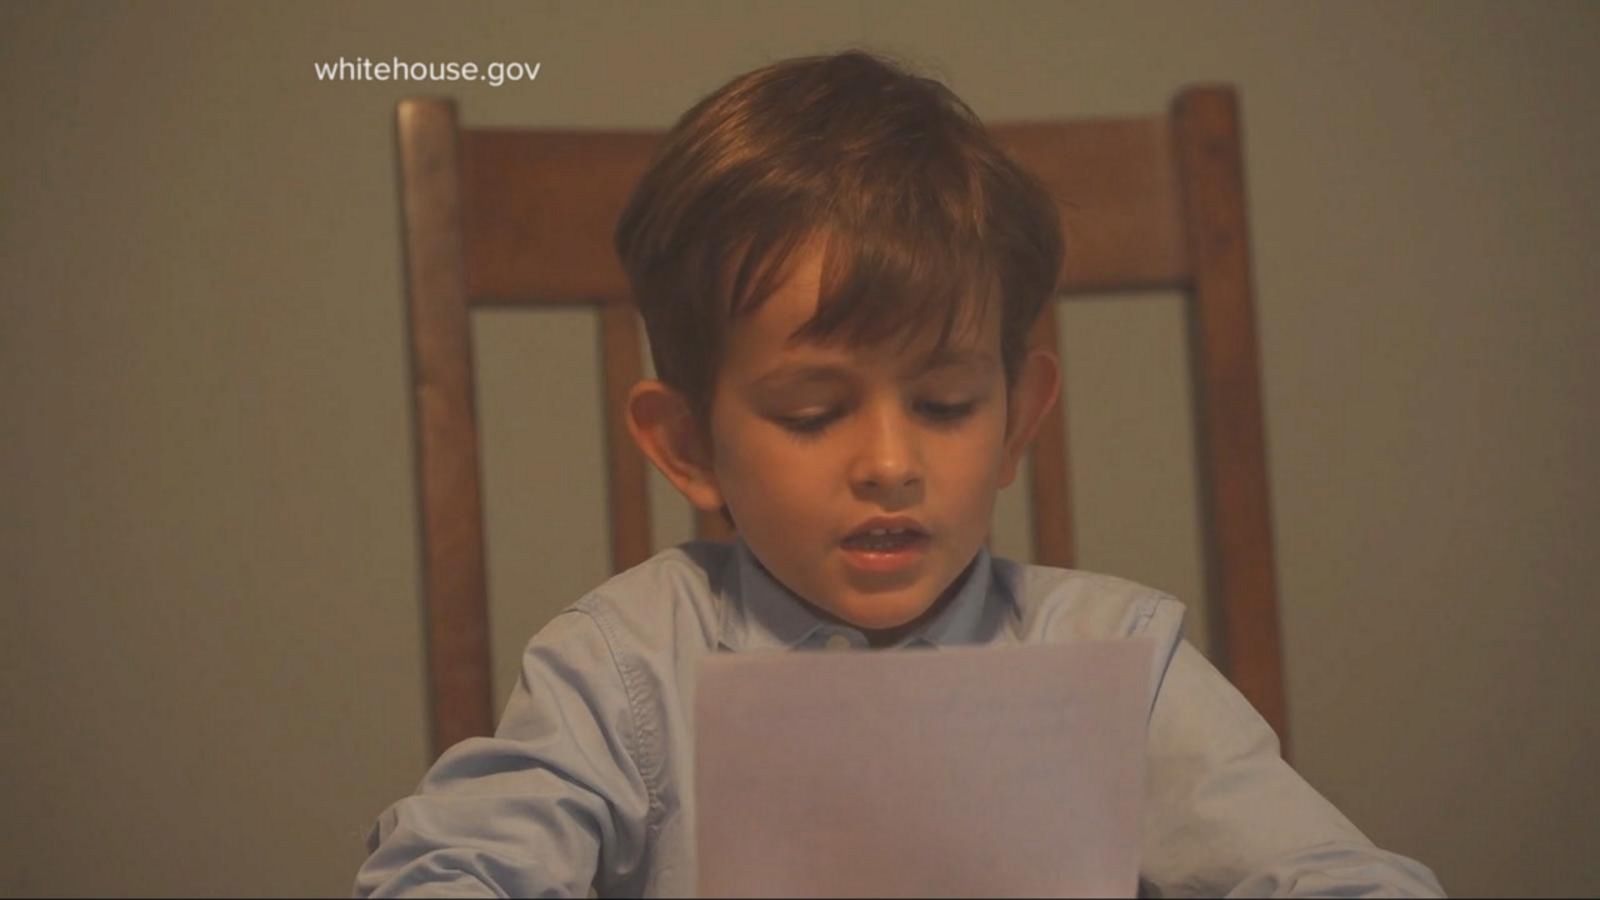 A 6-Year-Old Writes a Compassionate Letter to President Obama